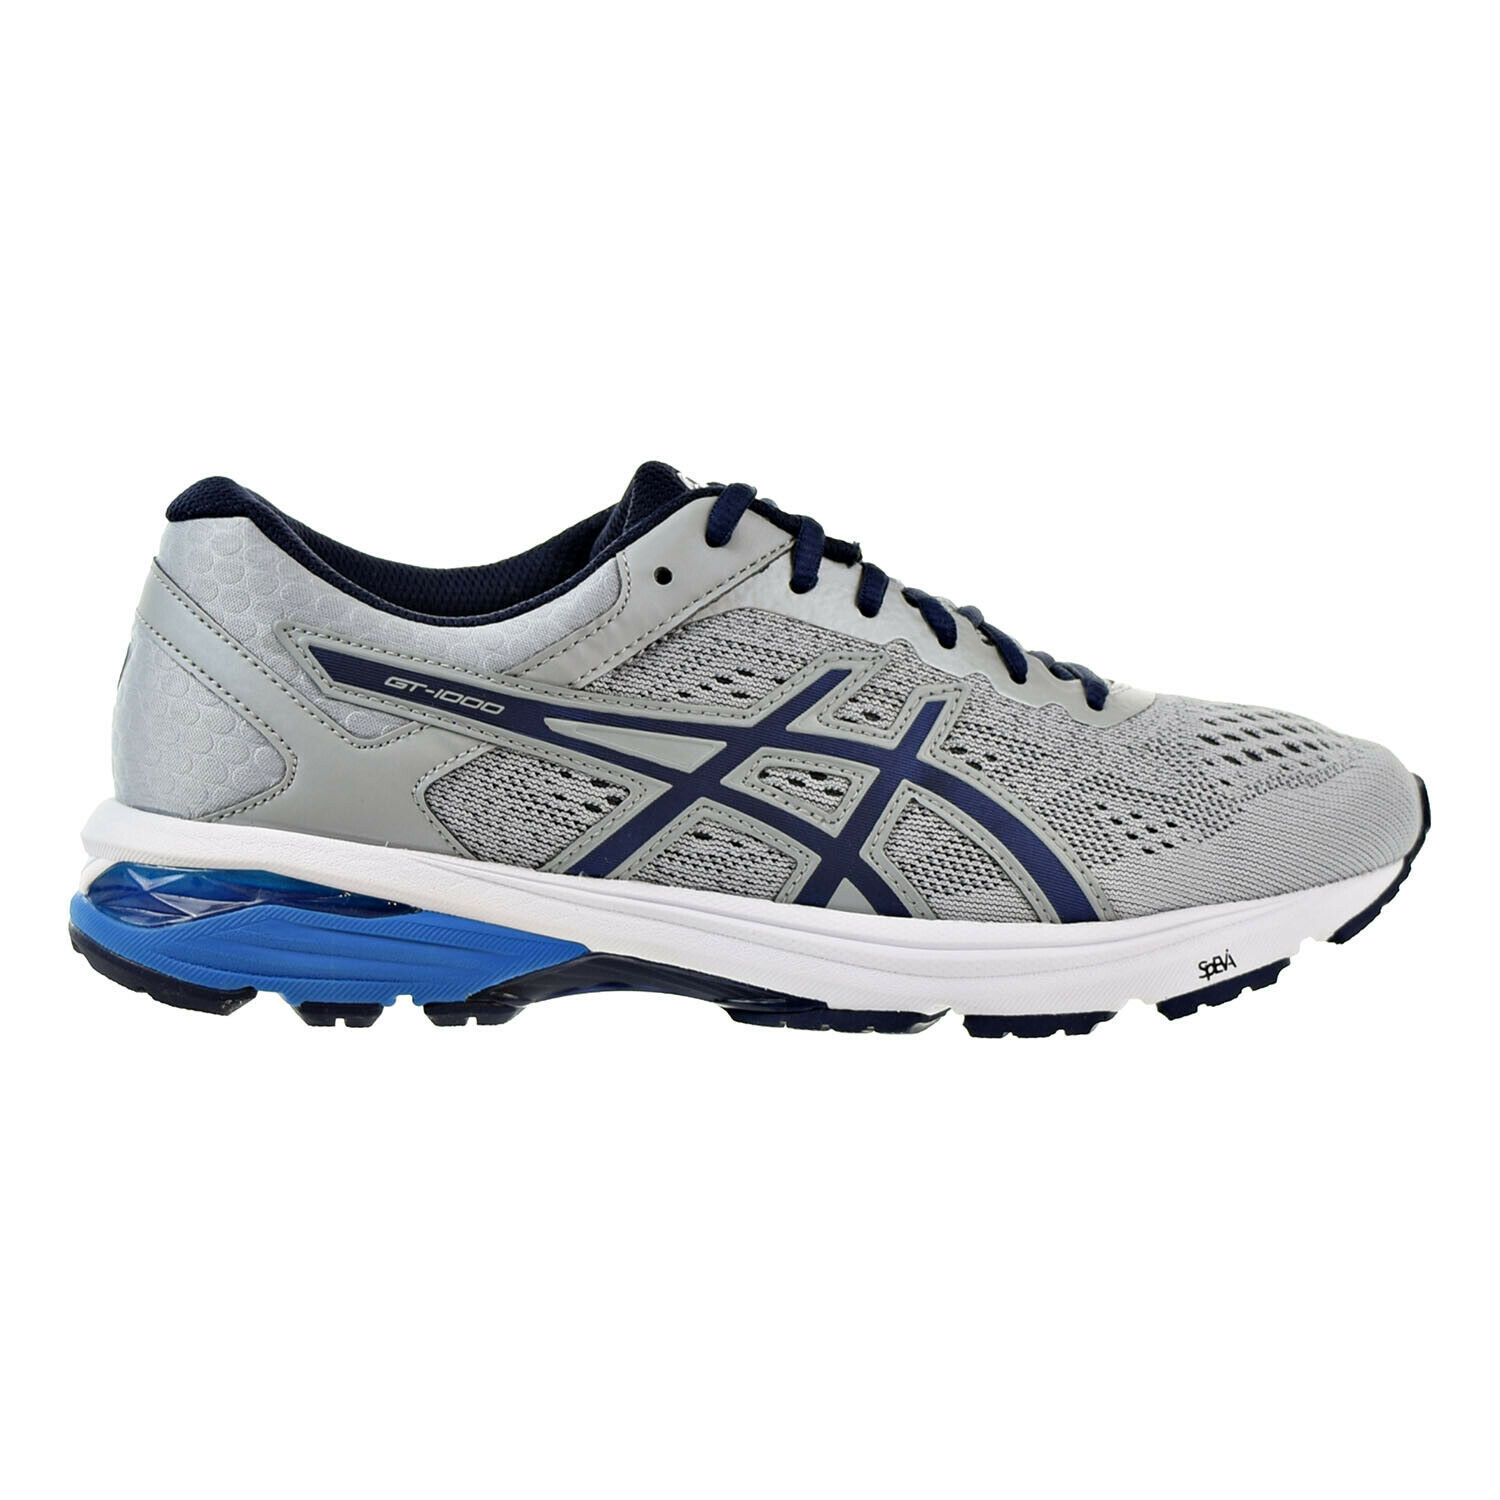 Primary image for Asics GT-1000 6 Men's Shoes Mid Grey-Peacoat-Directoire Blue t7a4n-9658